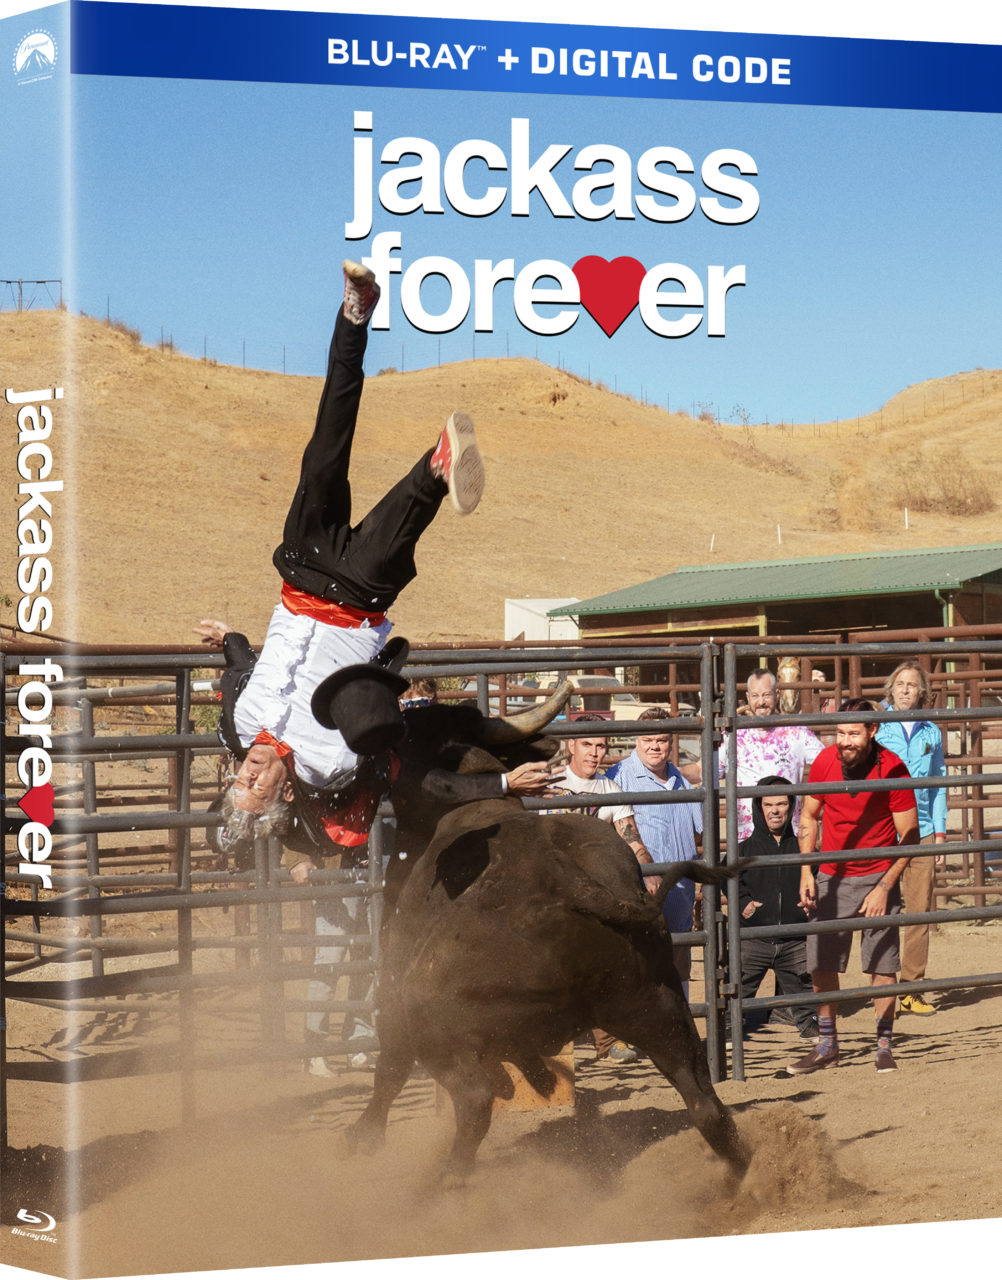 Jackass Forever Blu-Ray Combo Pack cover (Paramount Home Entertainment)